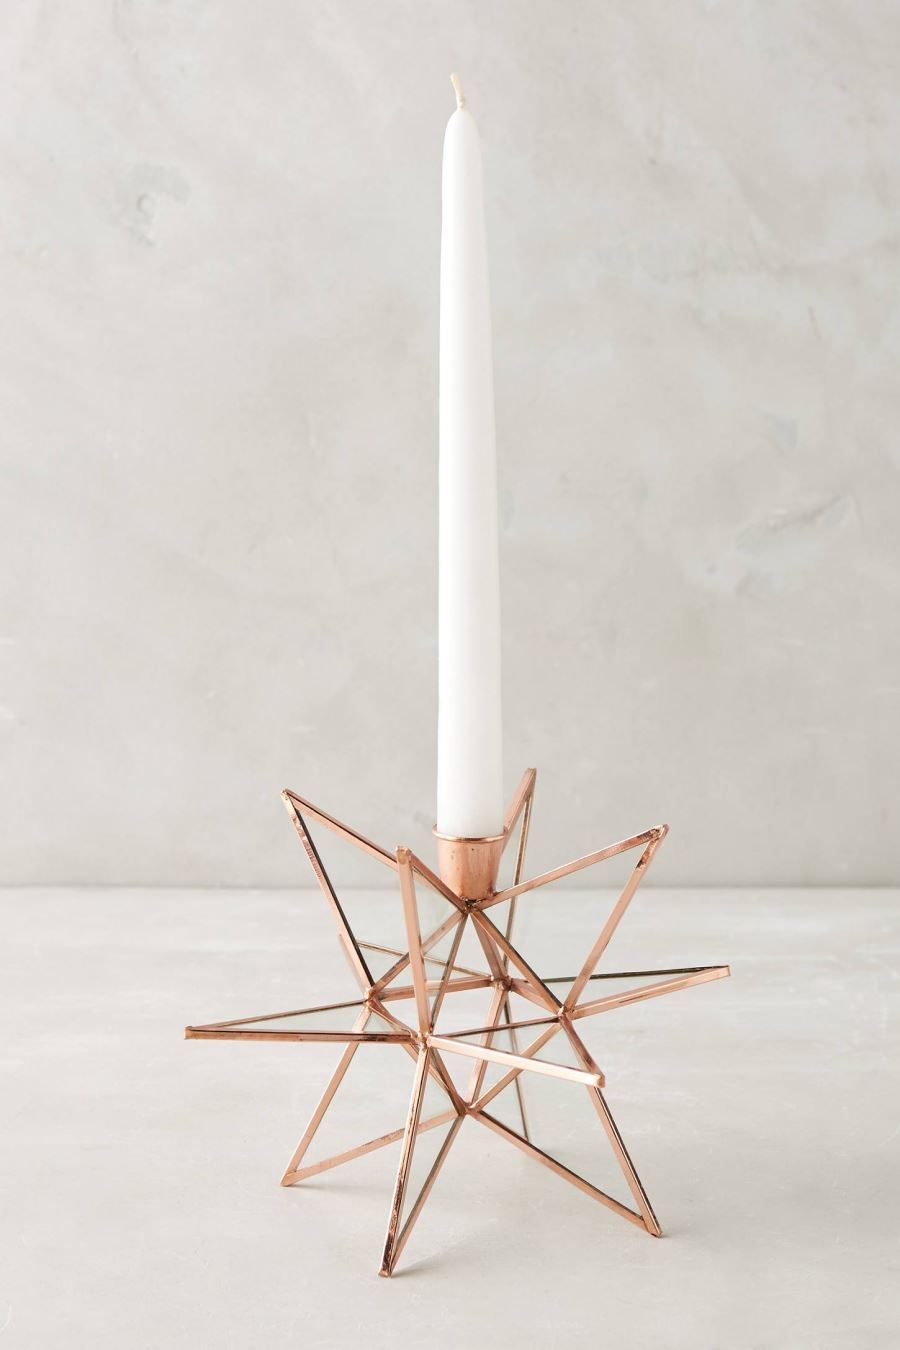 Sculptural candle holder from Anthropologie